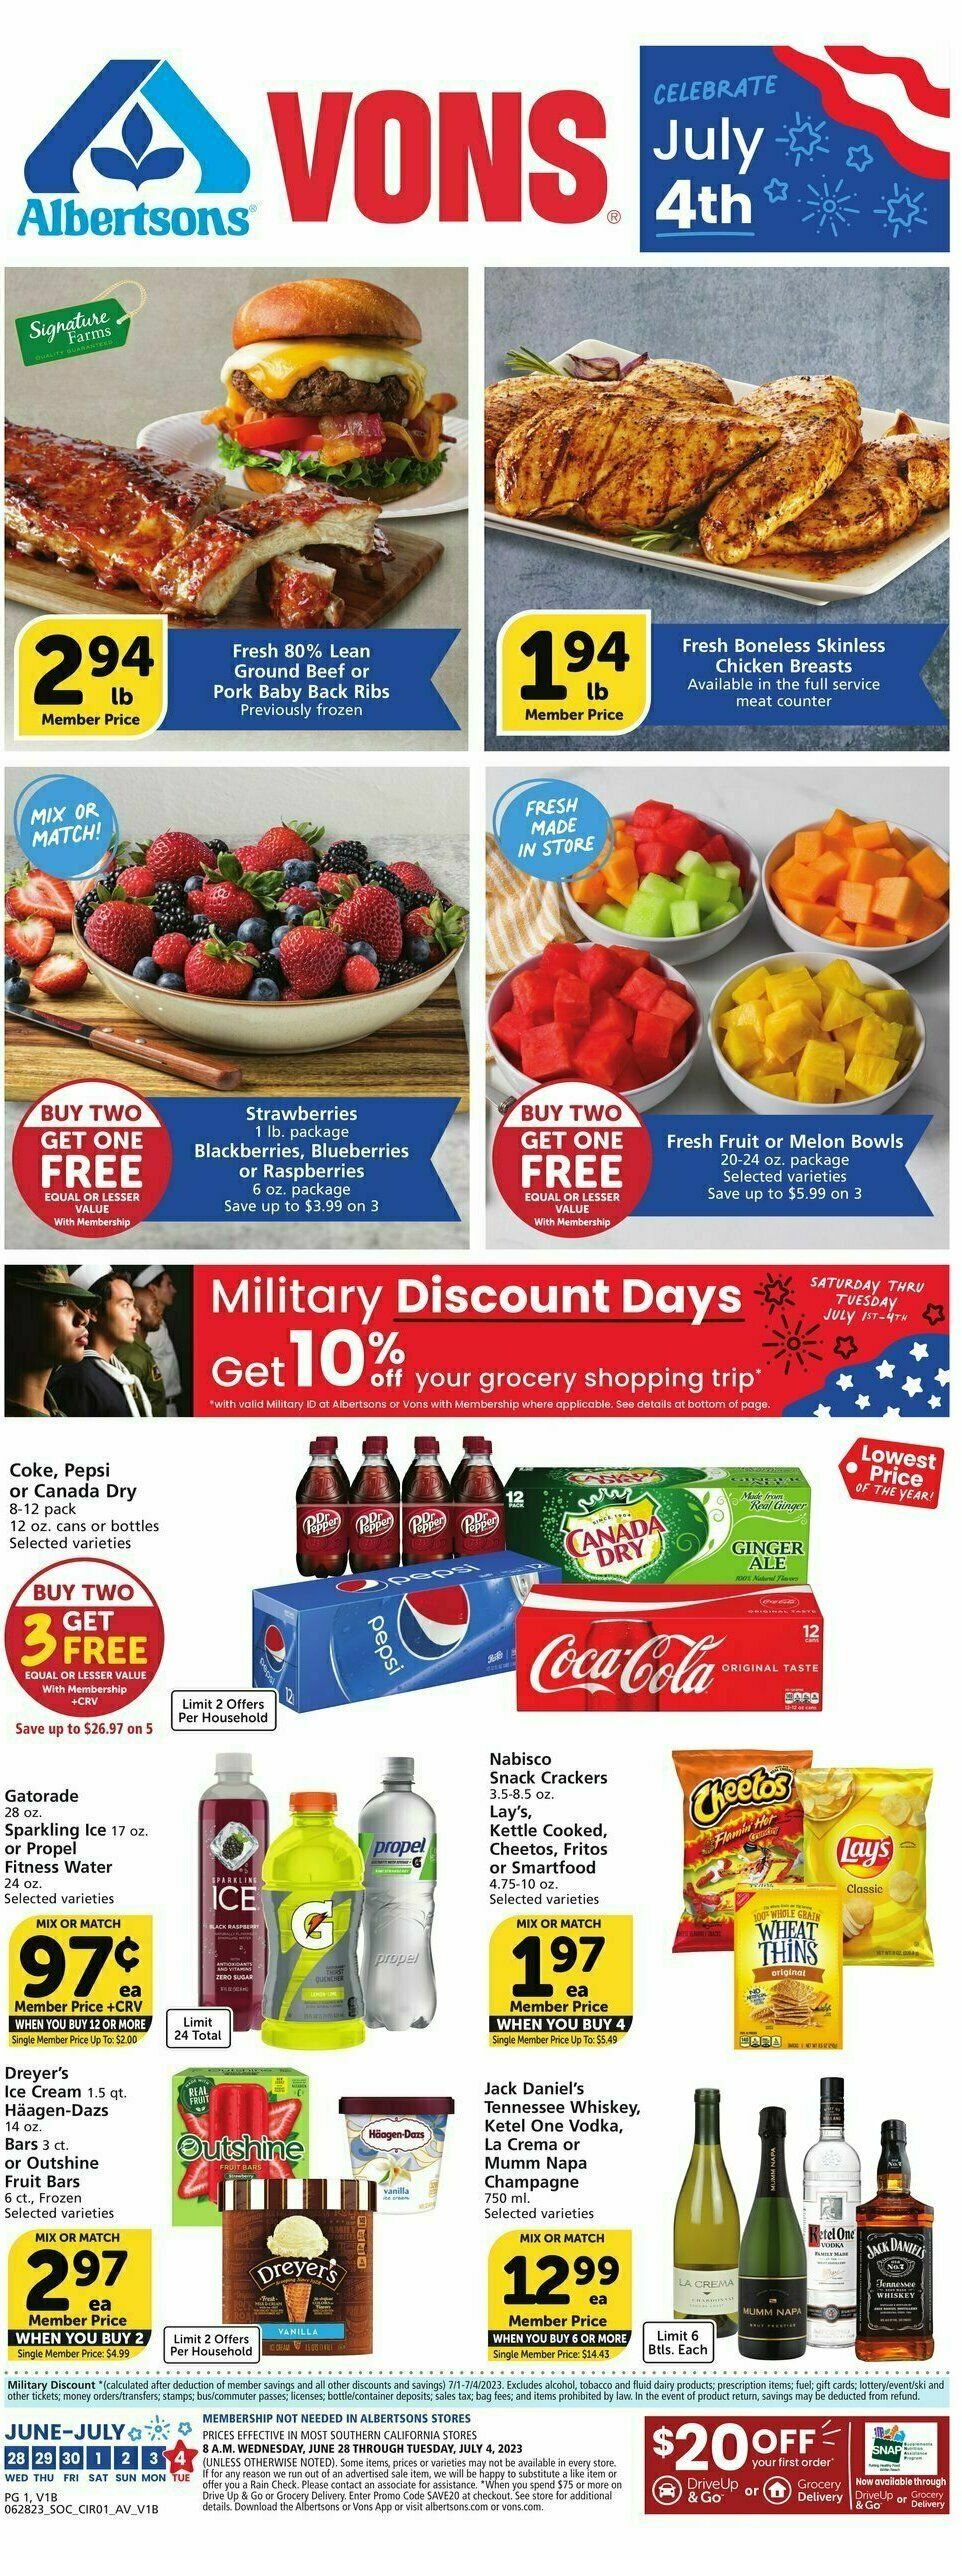 Vons Weekly Ad from June 28